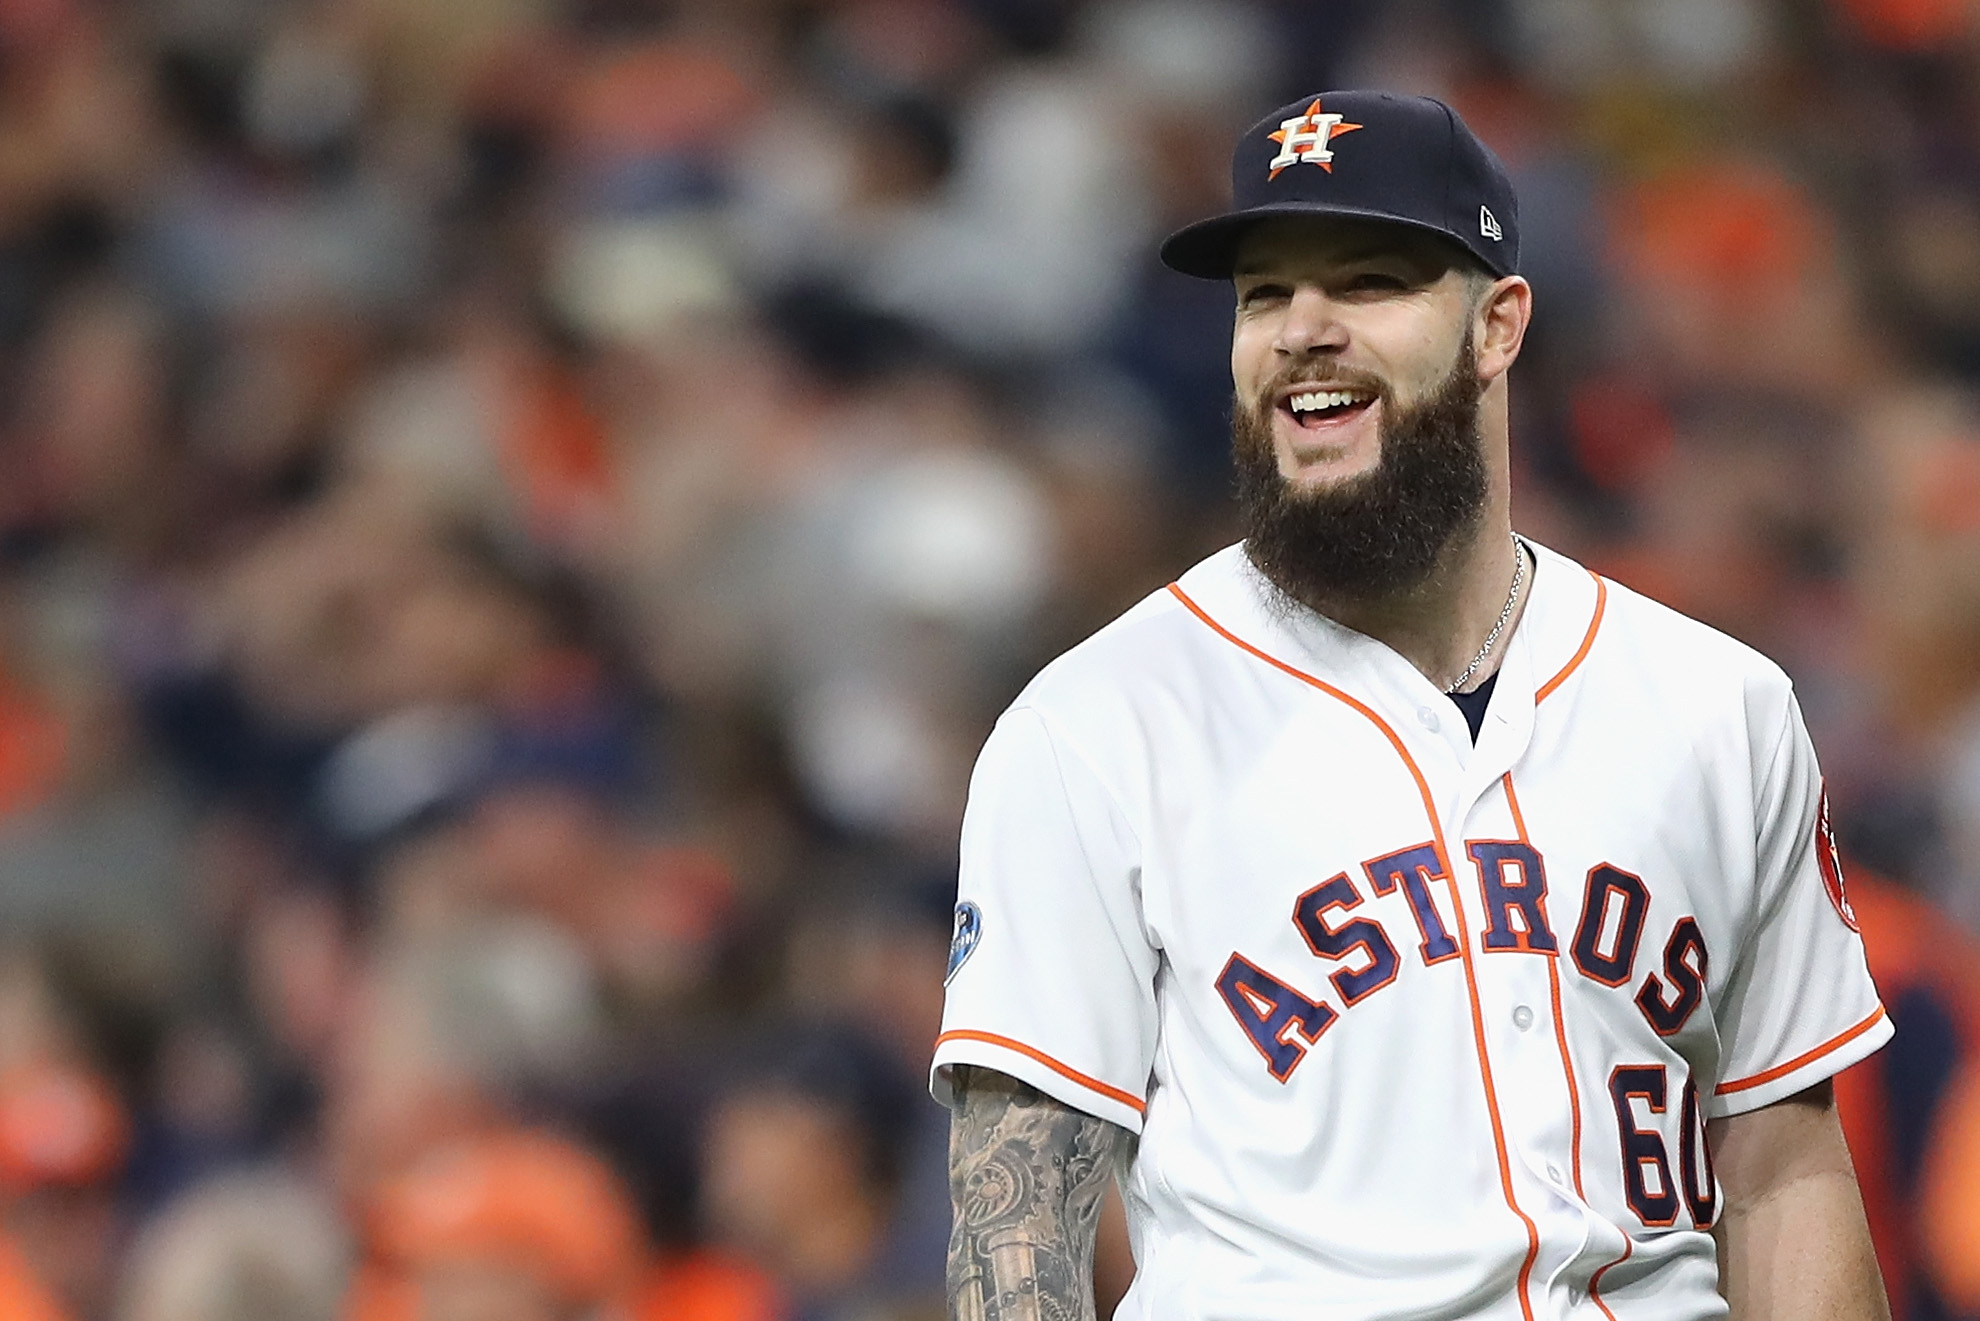 Yankees are reportedly among six suitors for free-agent former Cy Young Award winner Dallas Keuchel.